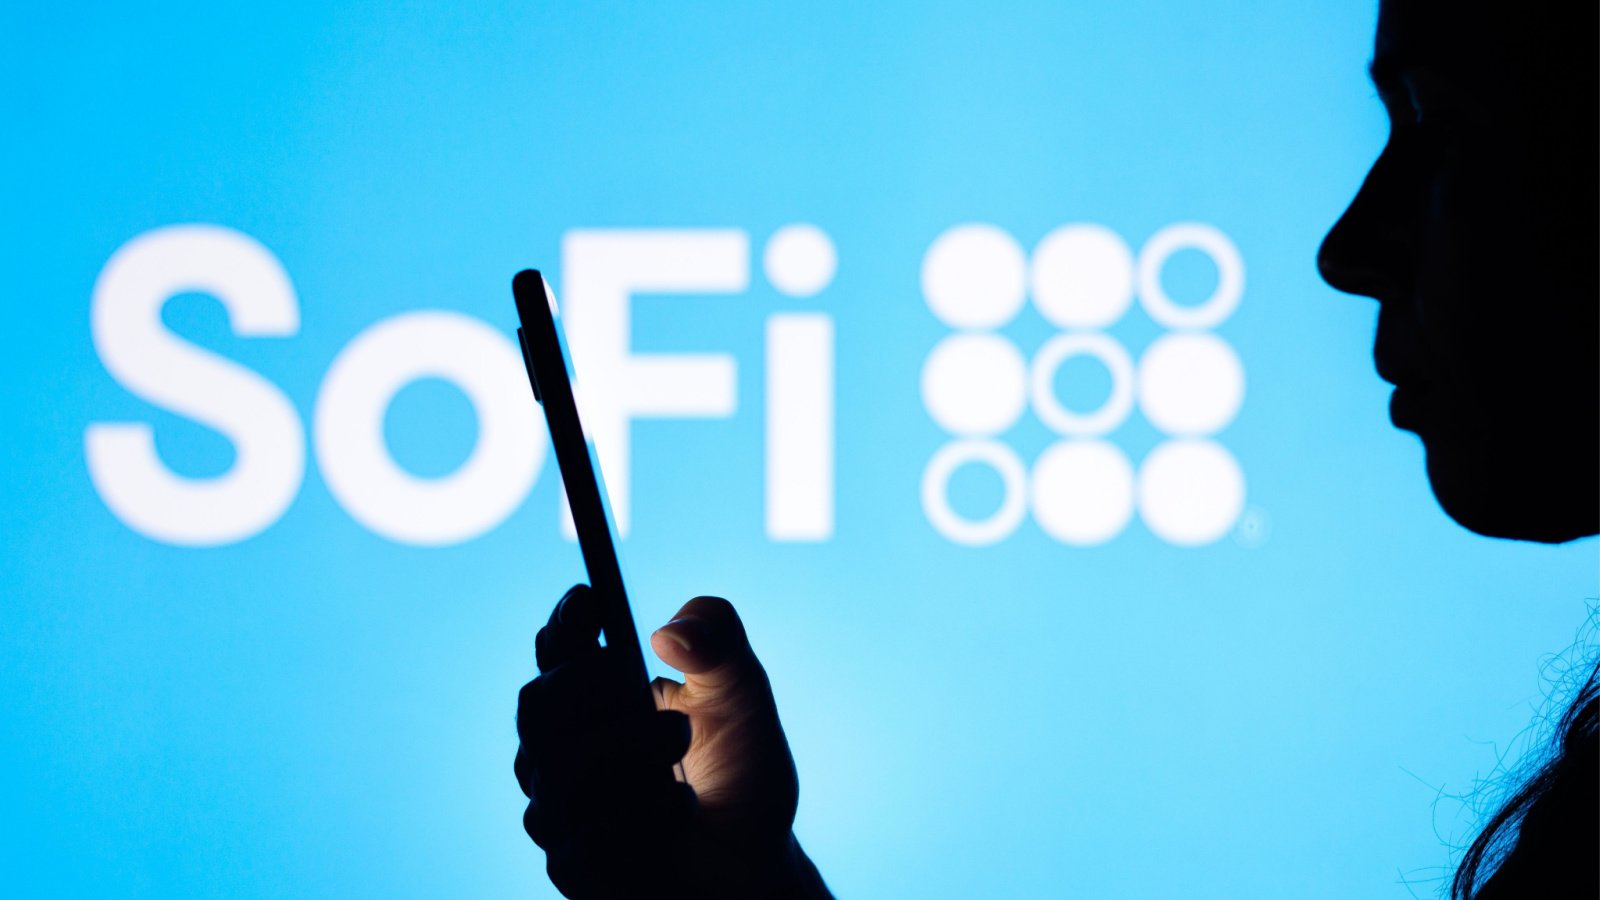 Silhouette of person holding mobile phone with SoFi (SOFI Stock) logo shown in background